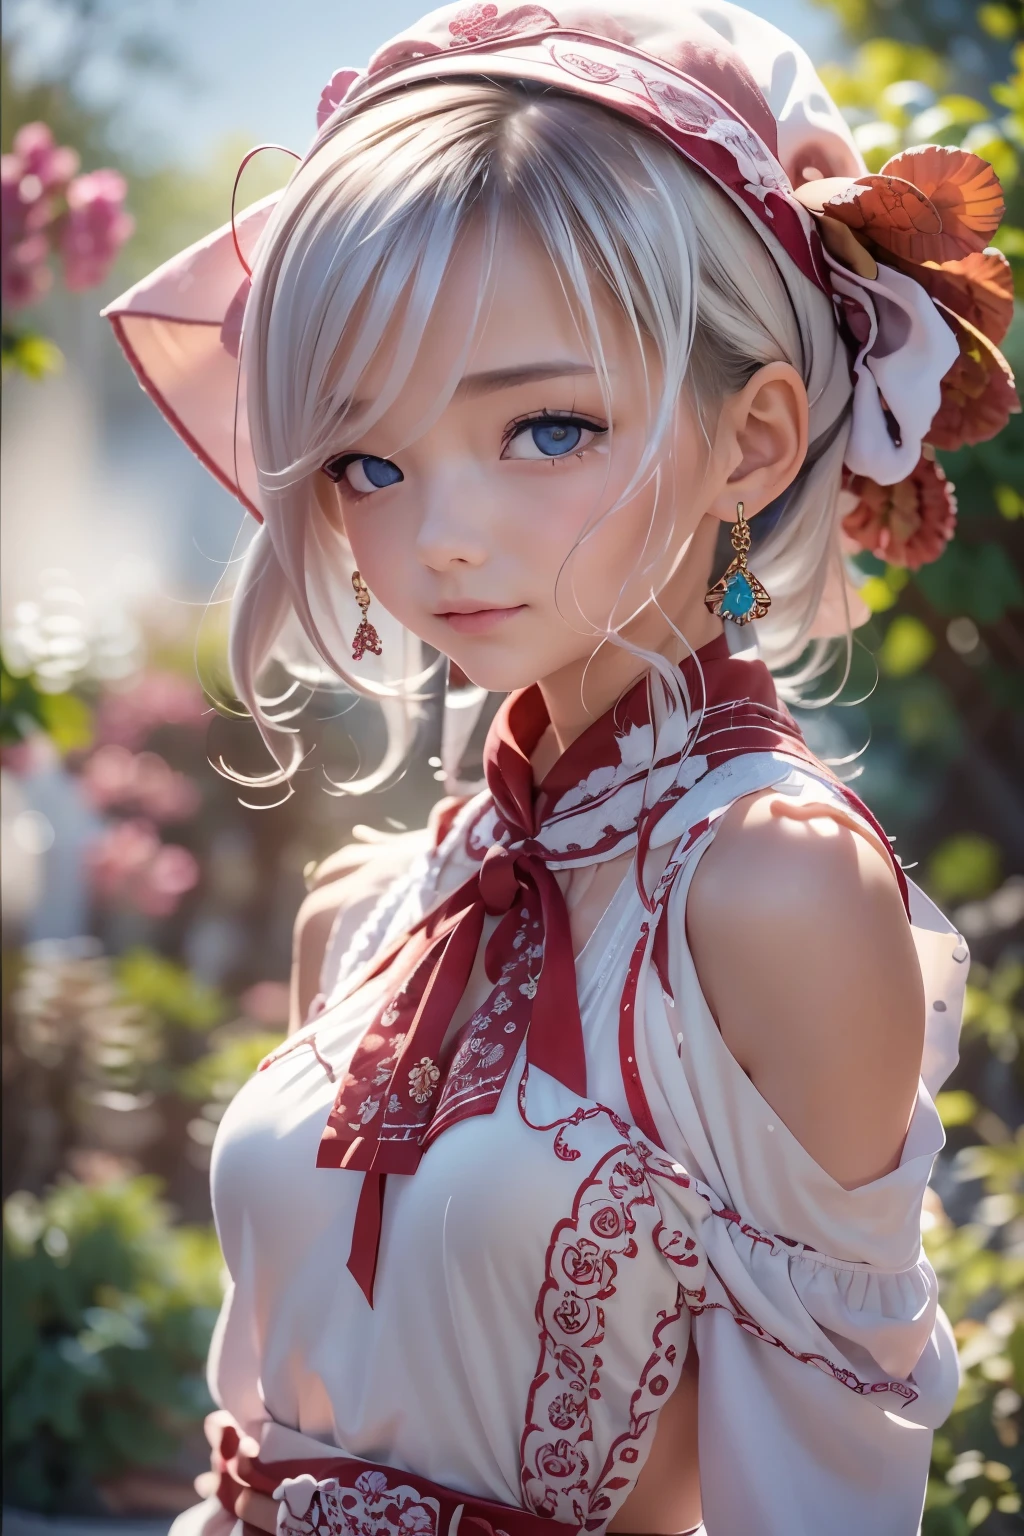 ((sfw: 1.4)), (sfw,She is wearing a long white embroidered skirt, a red blouse with lace, a white apron tied around her waist, blue socks, and brown leather shoes.A blue scarf is on her head. Yes, her accessories include necklaces, earrings, and bracelets. 1 Girl)), Ultra High Resolution, (Realistic: 1.4), RAW Photo, Best Quality, (Photorealistic Stick), Focus, Soft Light, ((15 years old)), (( (young face))), (surface), (depth of field), masterpiece, (realistic), woman, bangs, ((1 girl))